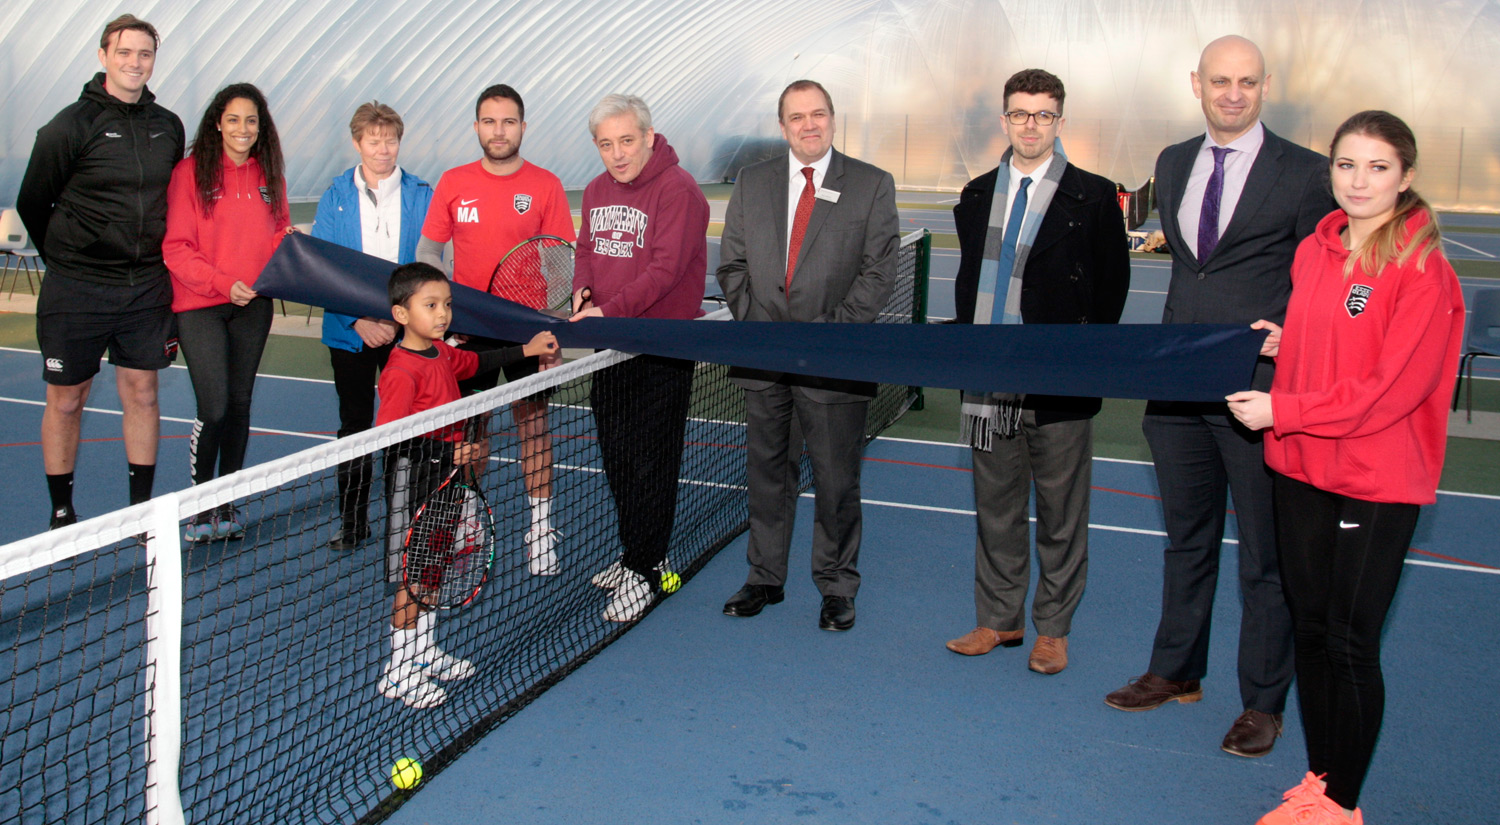 Opening our new tennis dome